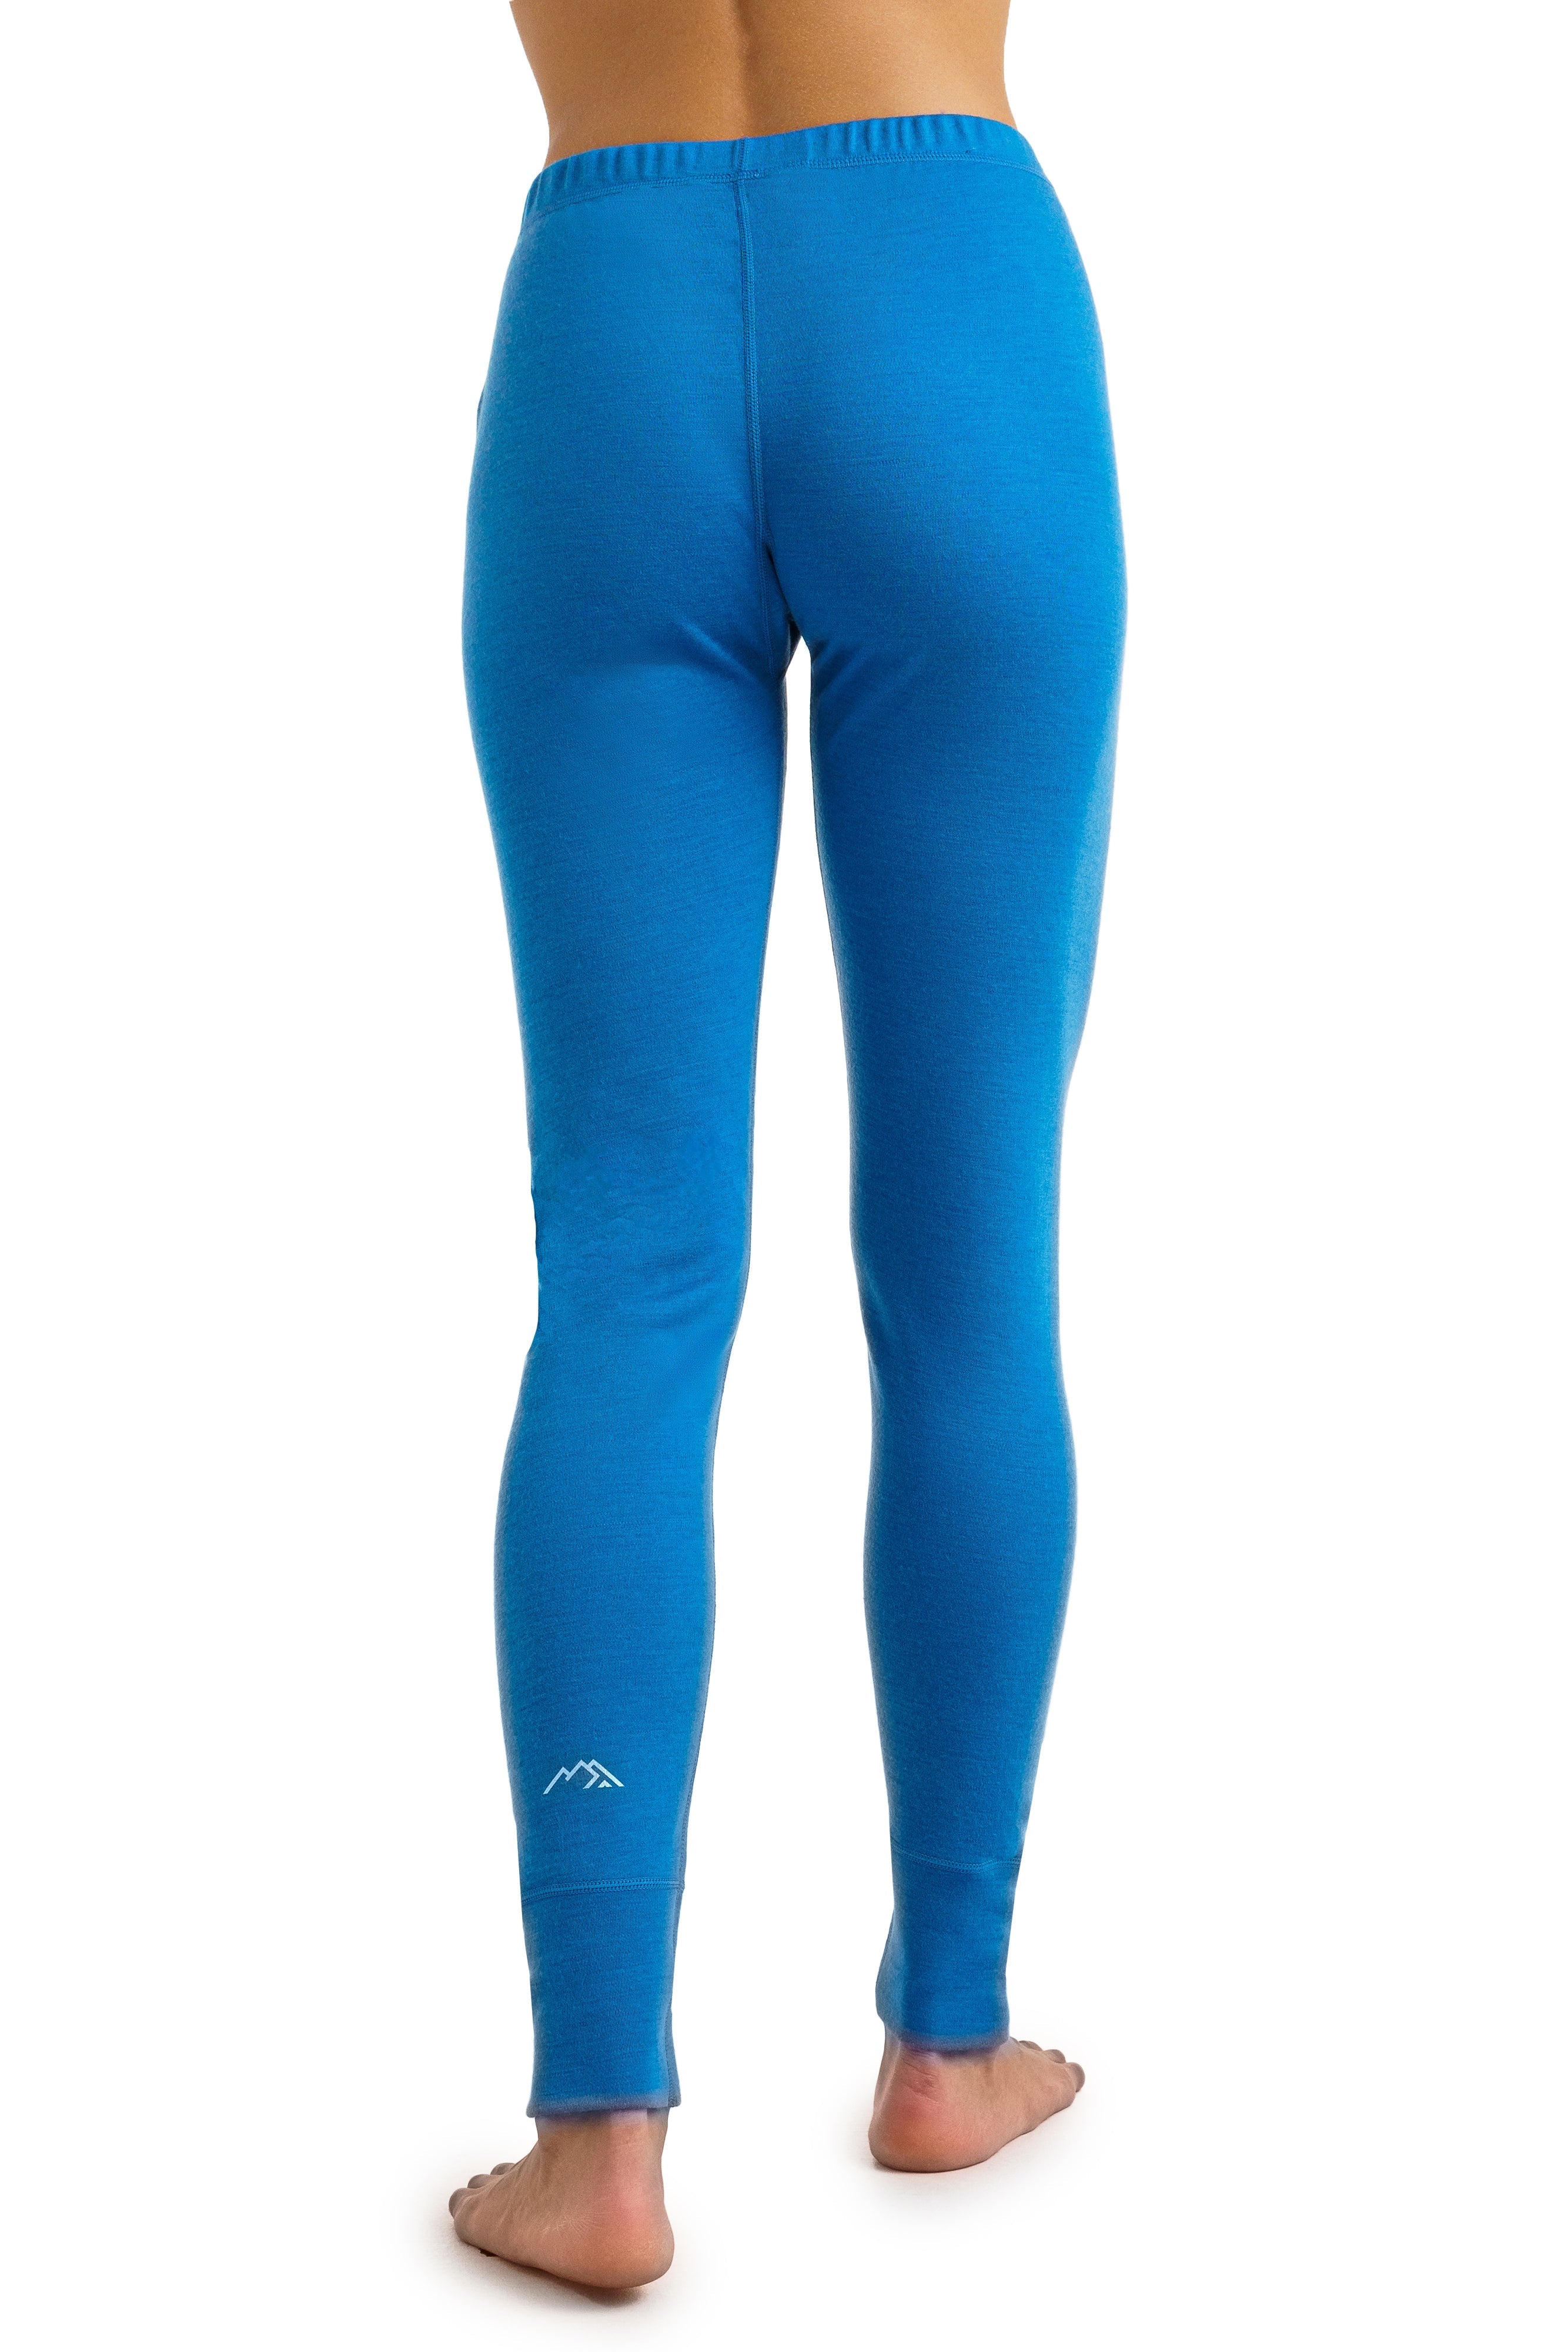 32 Degrees Womens Base Layer Thermal Leggings - Imported Products from USA  - iBhejo